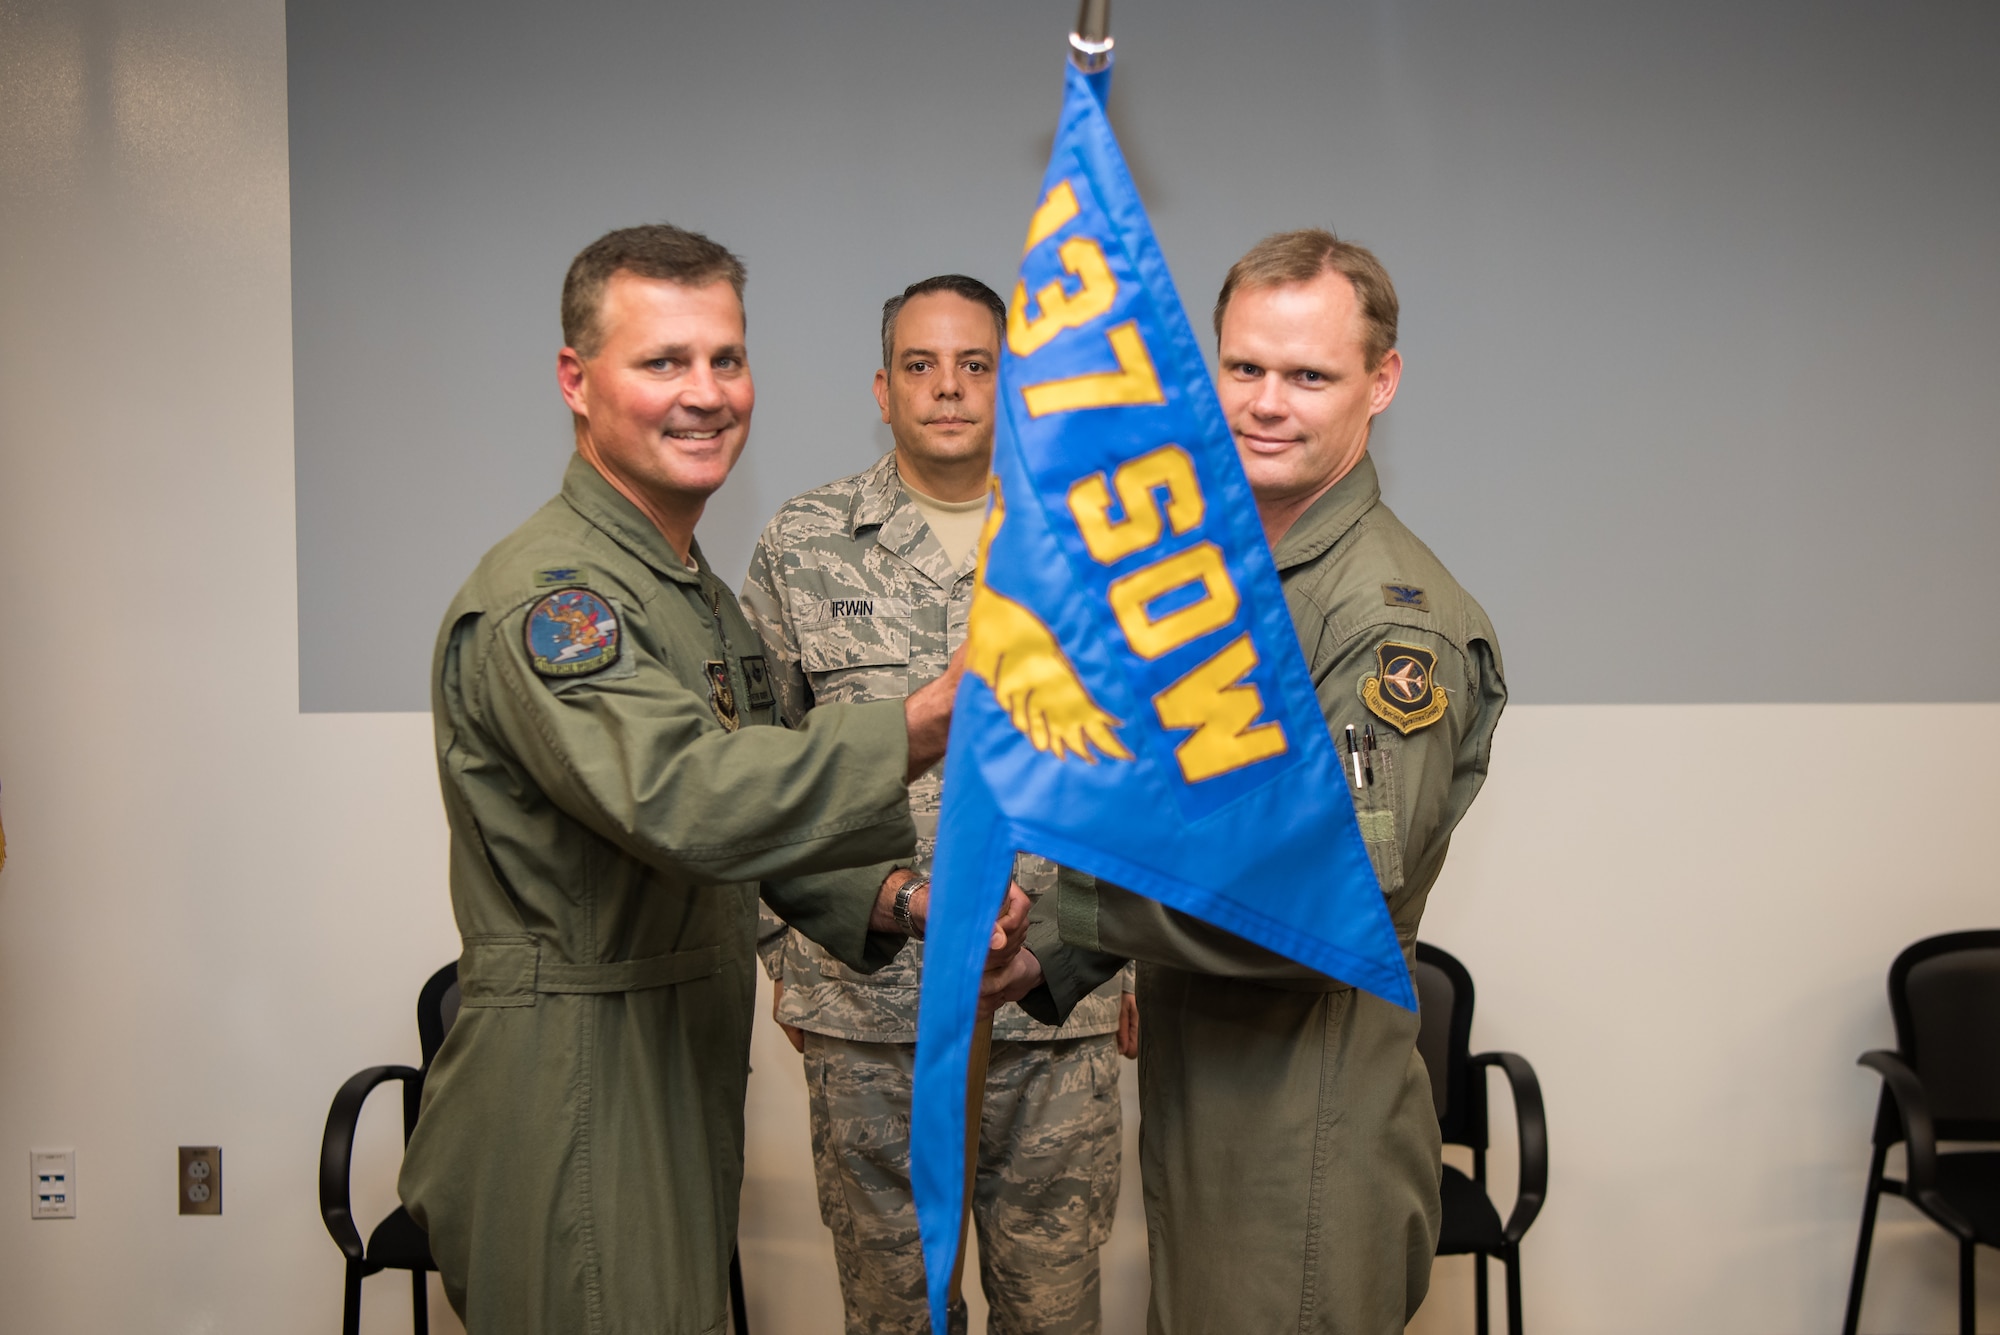 Col. Devin R. Wooden, 137th Special Operations Wing commander (left), and Col. Daniel R. “Pinto” Fowler, incoming 137th Special Operations Group commander (right), pose with the 137th SOG guide-on during the Group’s change of command ceremony at Will Rogers Air National Guard Base in Oklahoma City, May 17, 2018. Fowler, formerly the Air National Guard's Advisor to U.S. Air Force Special Operations Command, Hurlbert Field, Fla., assumed command with more than 20 years of military experience, including three years as a Joint Terminal Attack Control qualified Air Liaison Officer and 12 years of flying. (U.S. Air National Guard photo by Staff Sgt. Kasey Phipps)